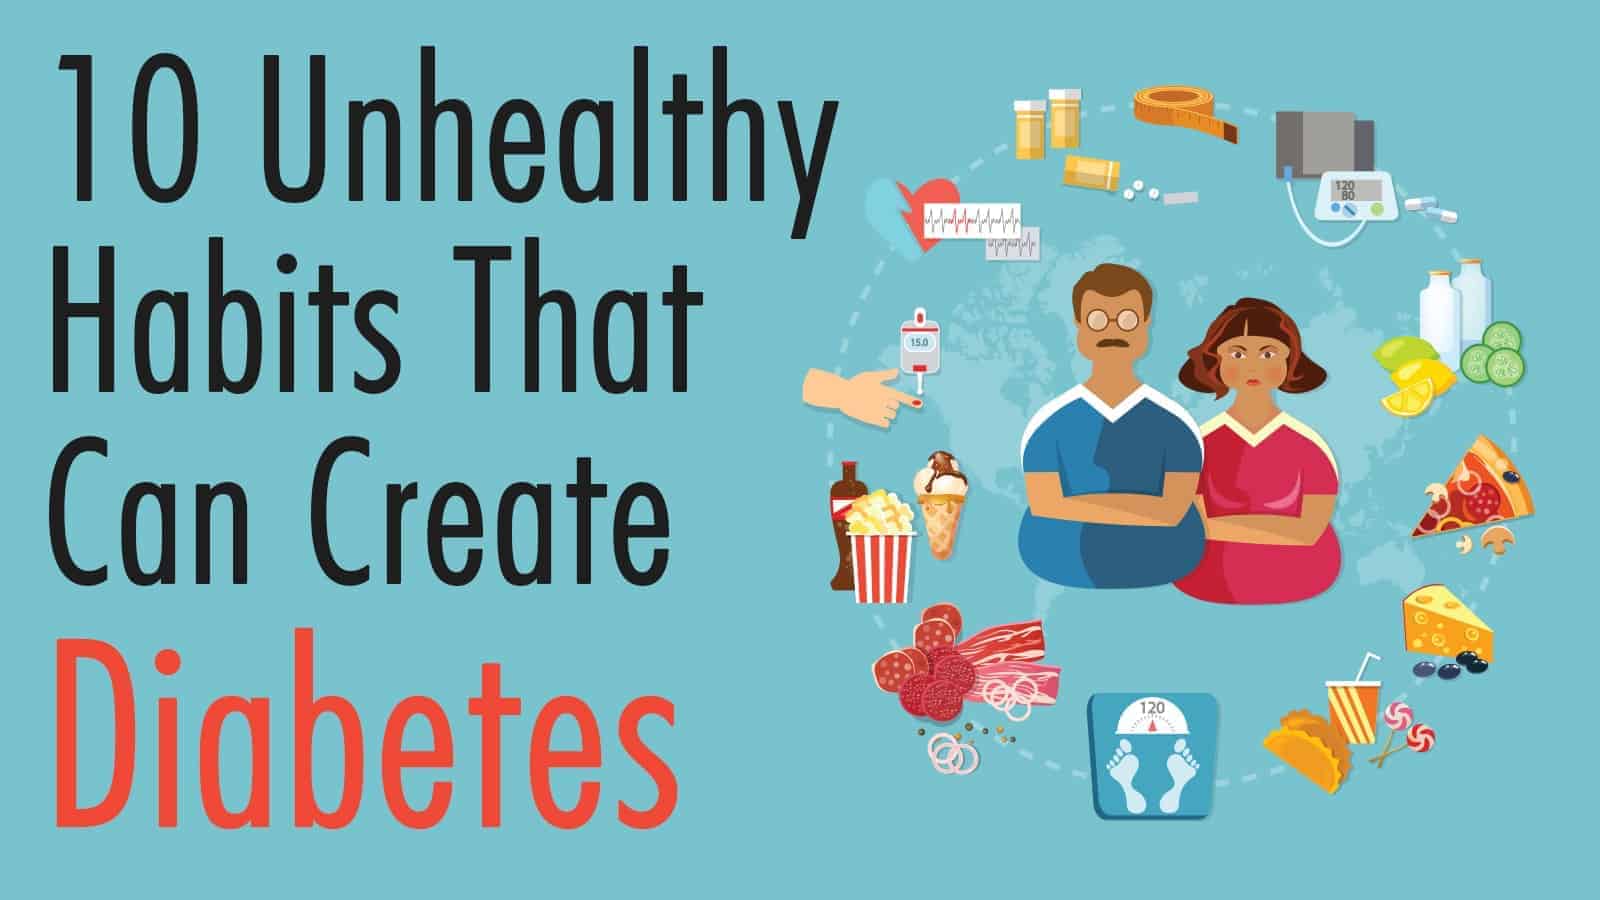 10 Unhealthy Habits That Can Create Diabetes